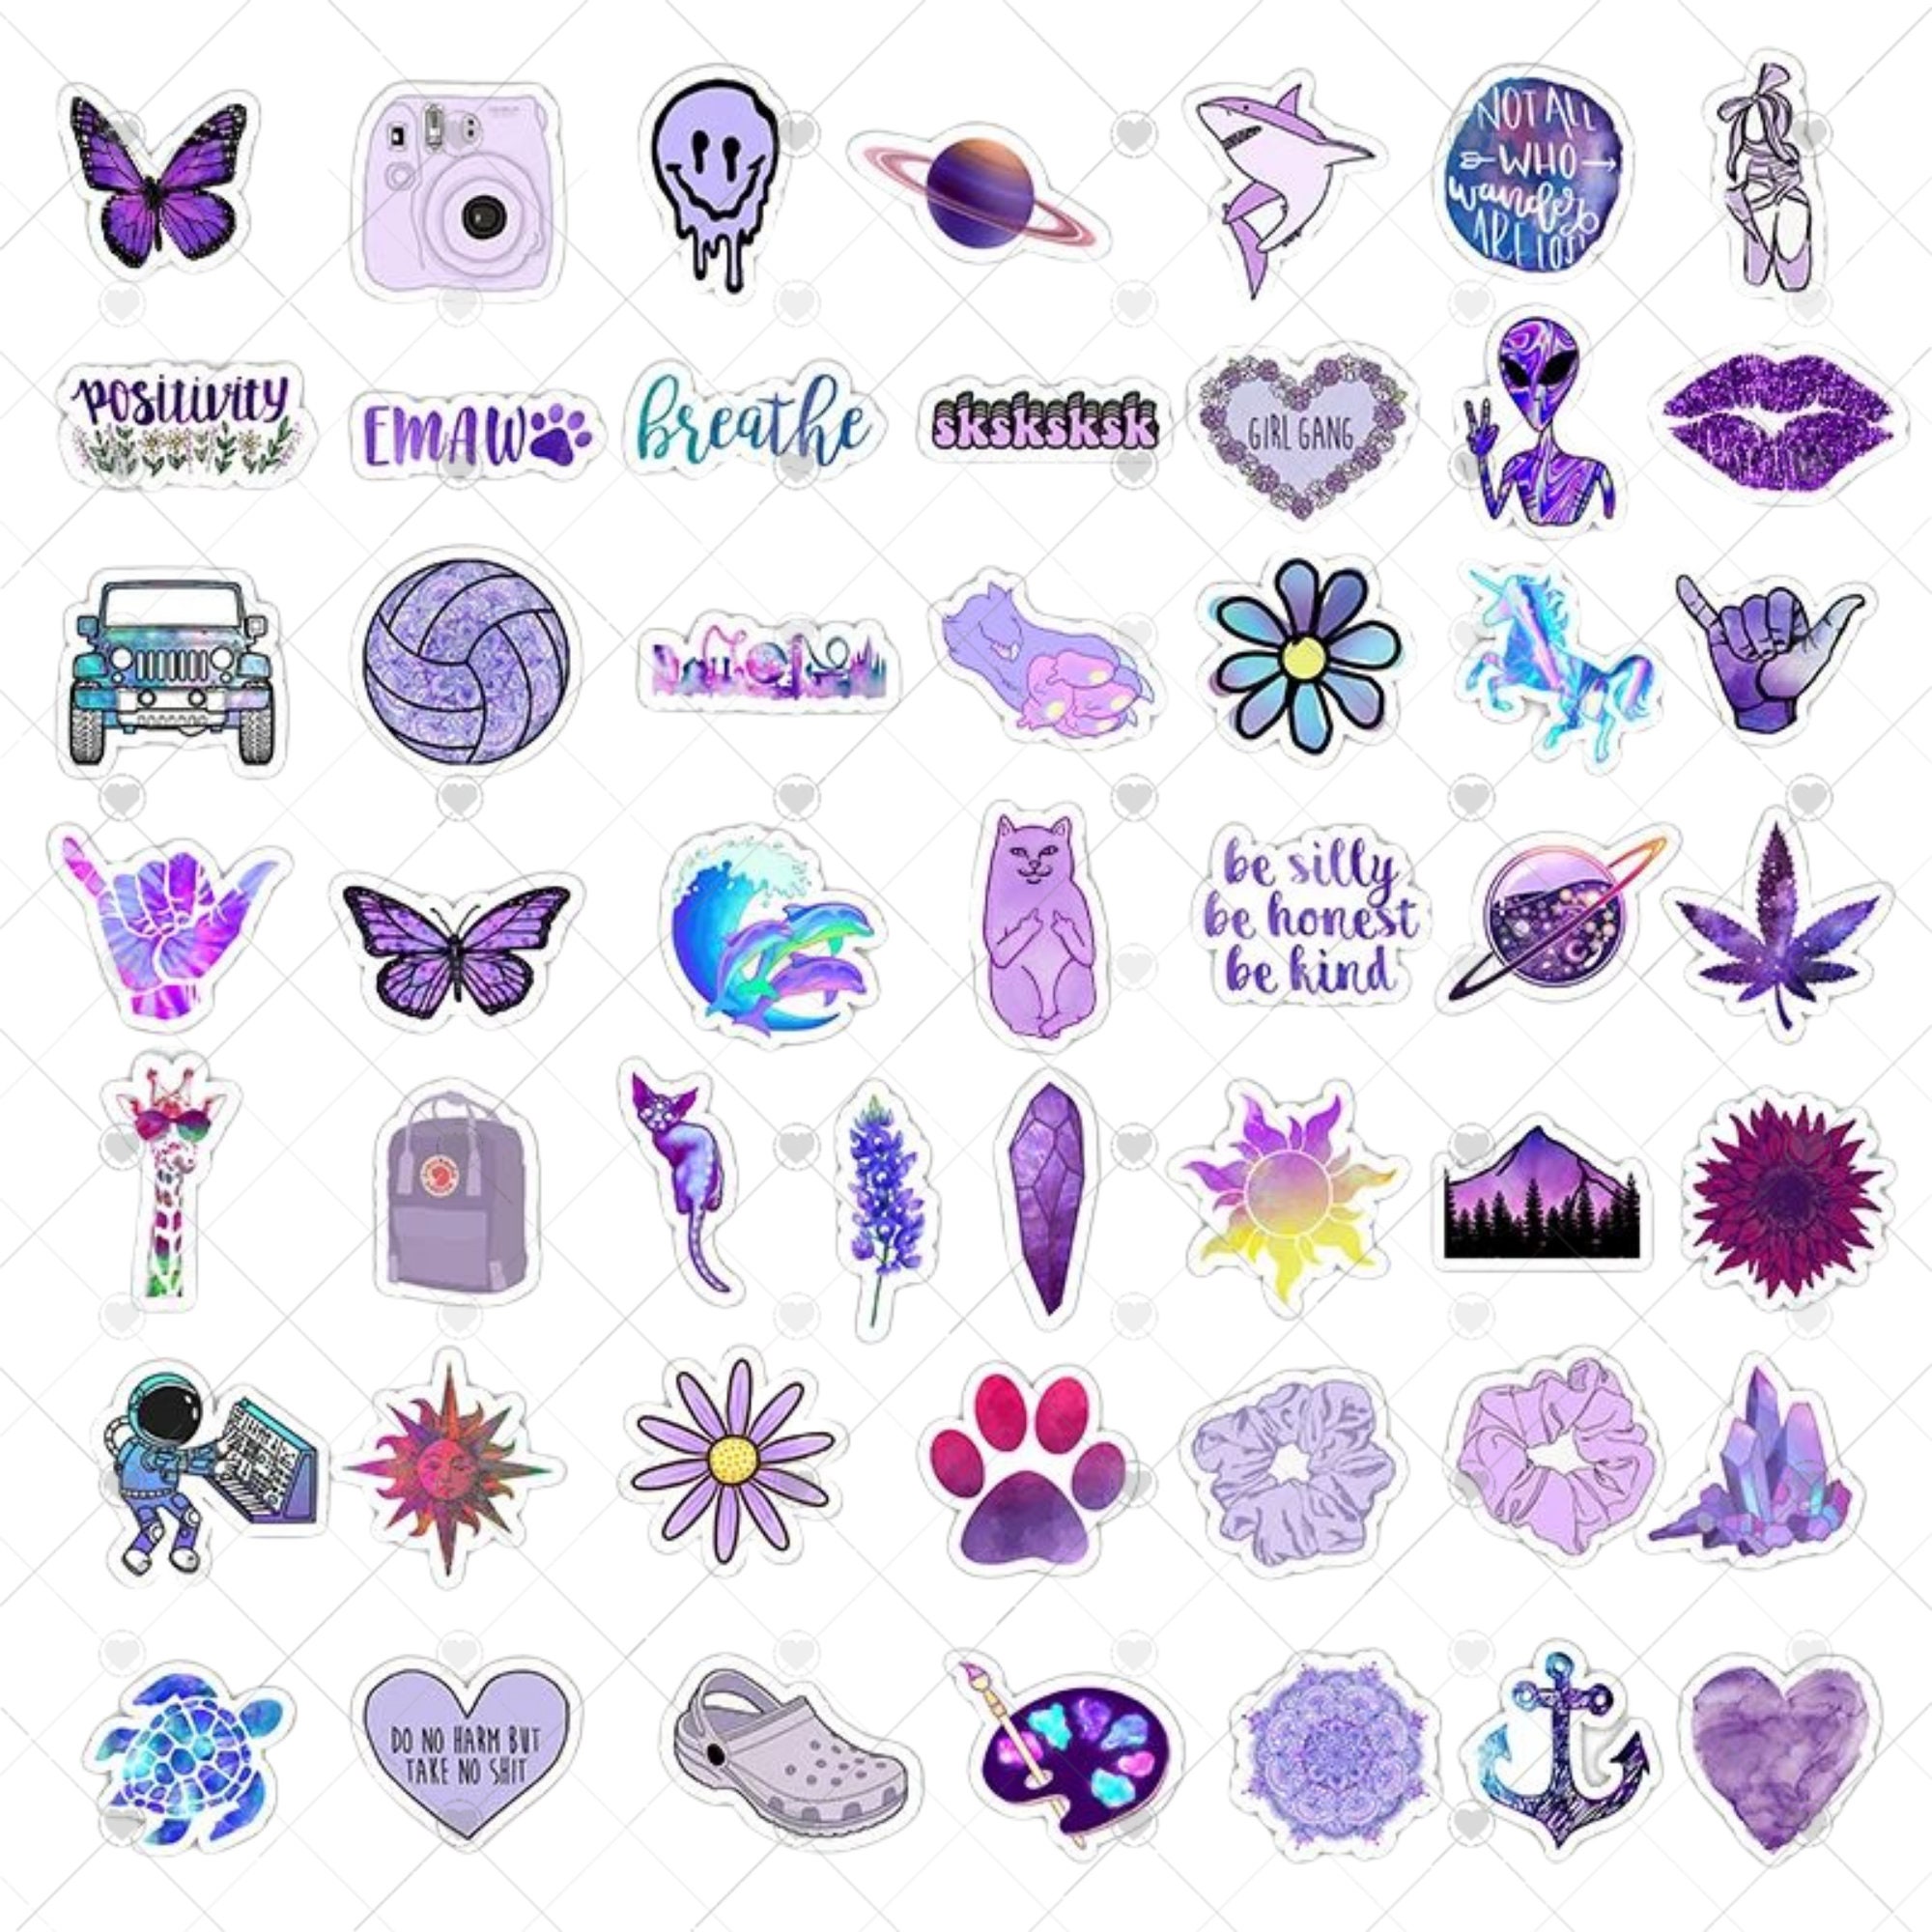 printable-purple-stickers-aesthetic-stickers-png-stickers-print-n-cut-stickers